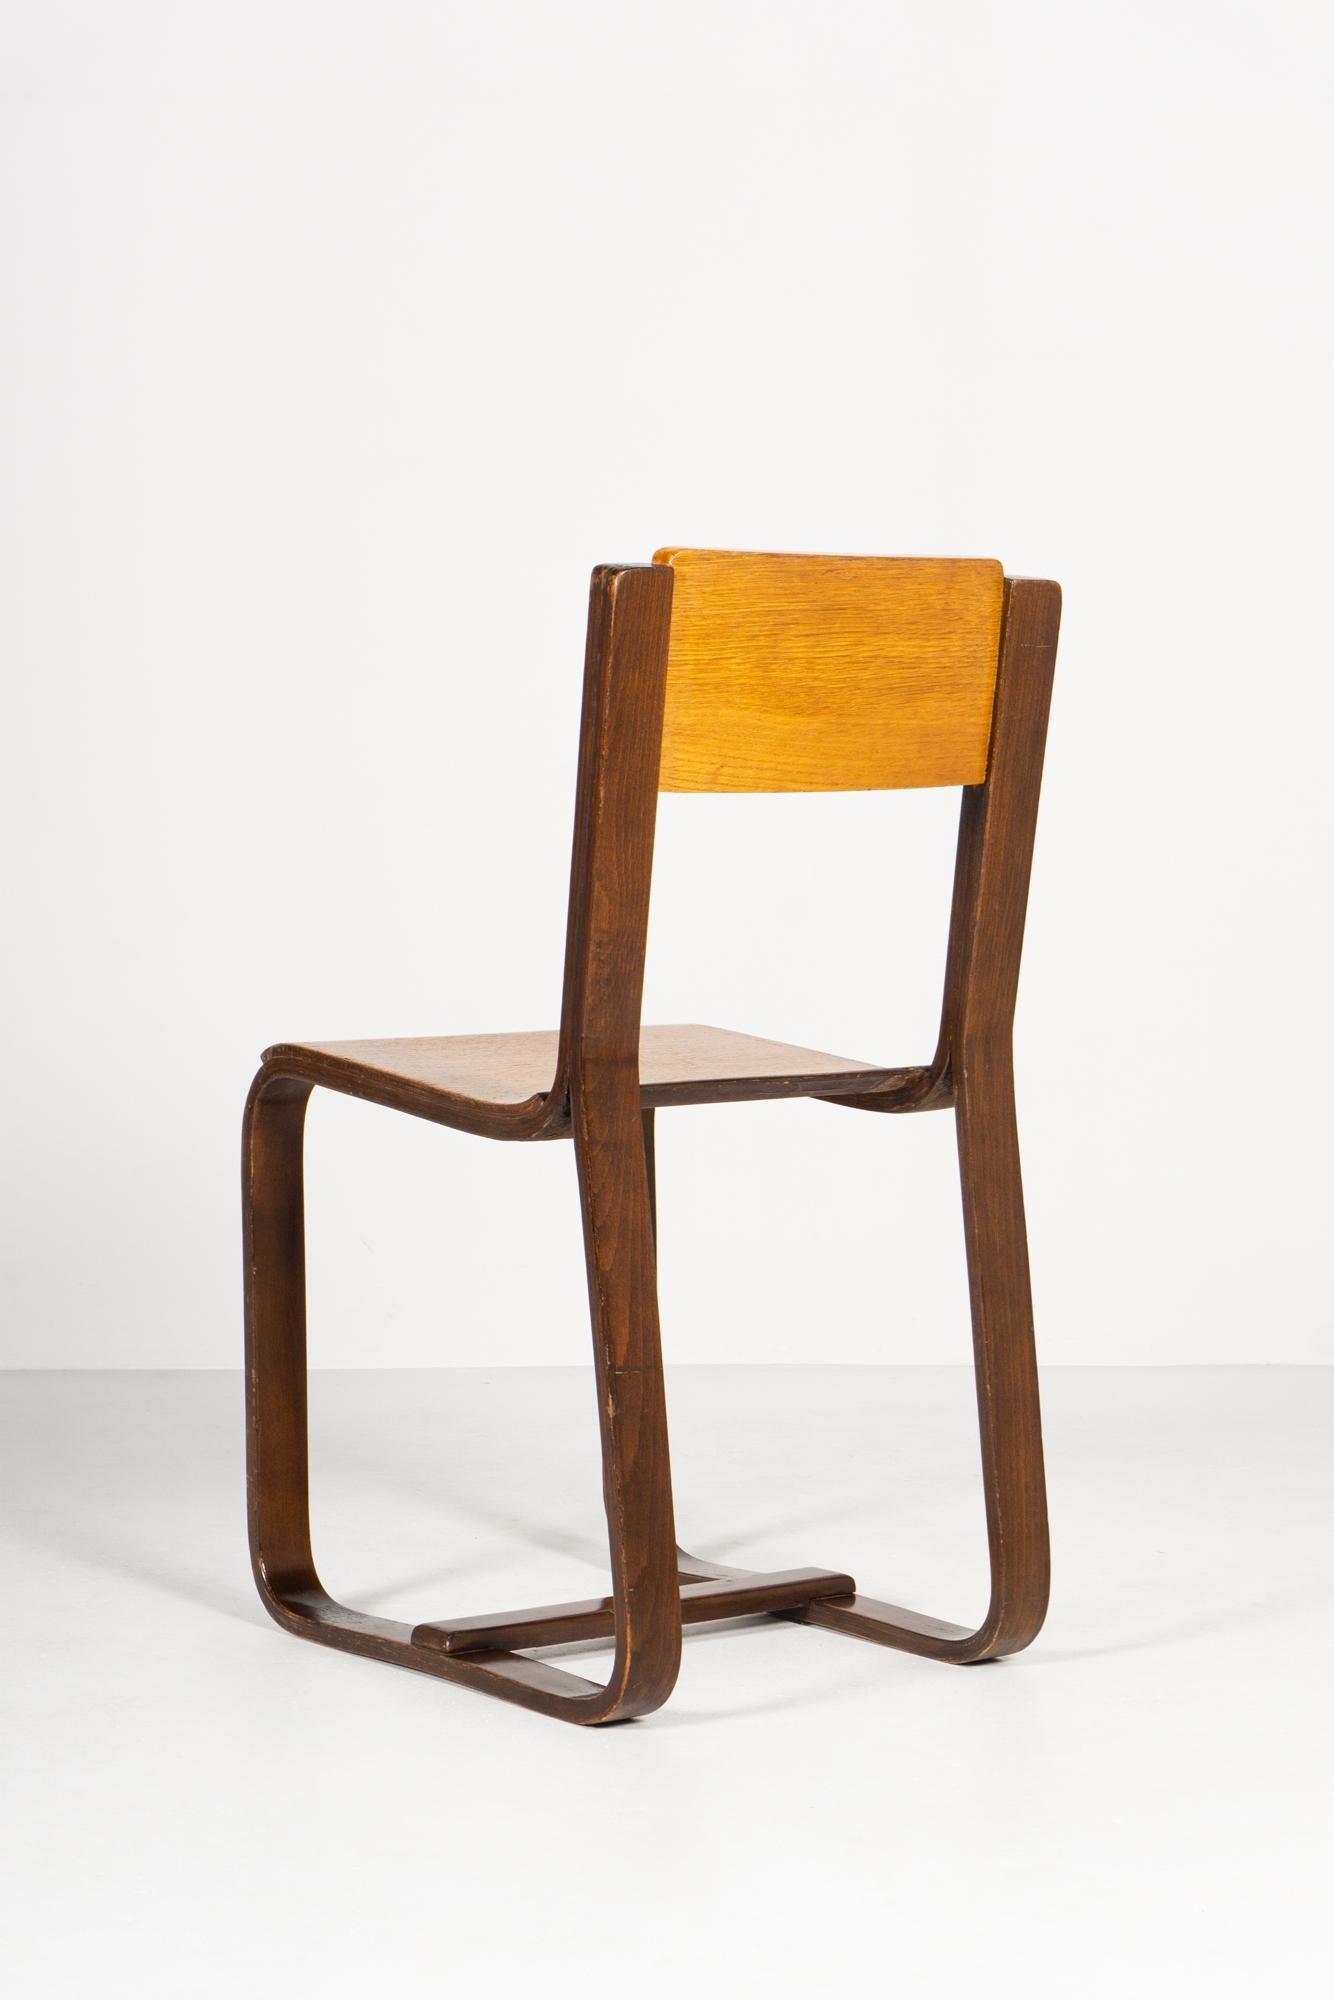 Chair, plywood construction, dark stained, ash veneer
Design / Giuseppe Pagano Pogatschnig 1938
Dimensions / H.84cm W.40cm D.50cm
Manufacturer / Maggioni Italy
Designed for the Bocconi University in Milan, no serial production

TWO CHAIRS AVAILABLE.
